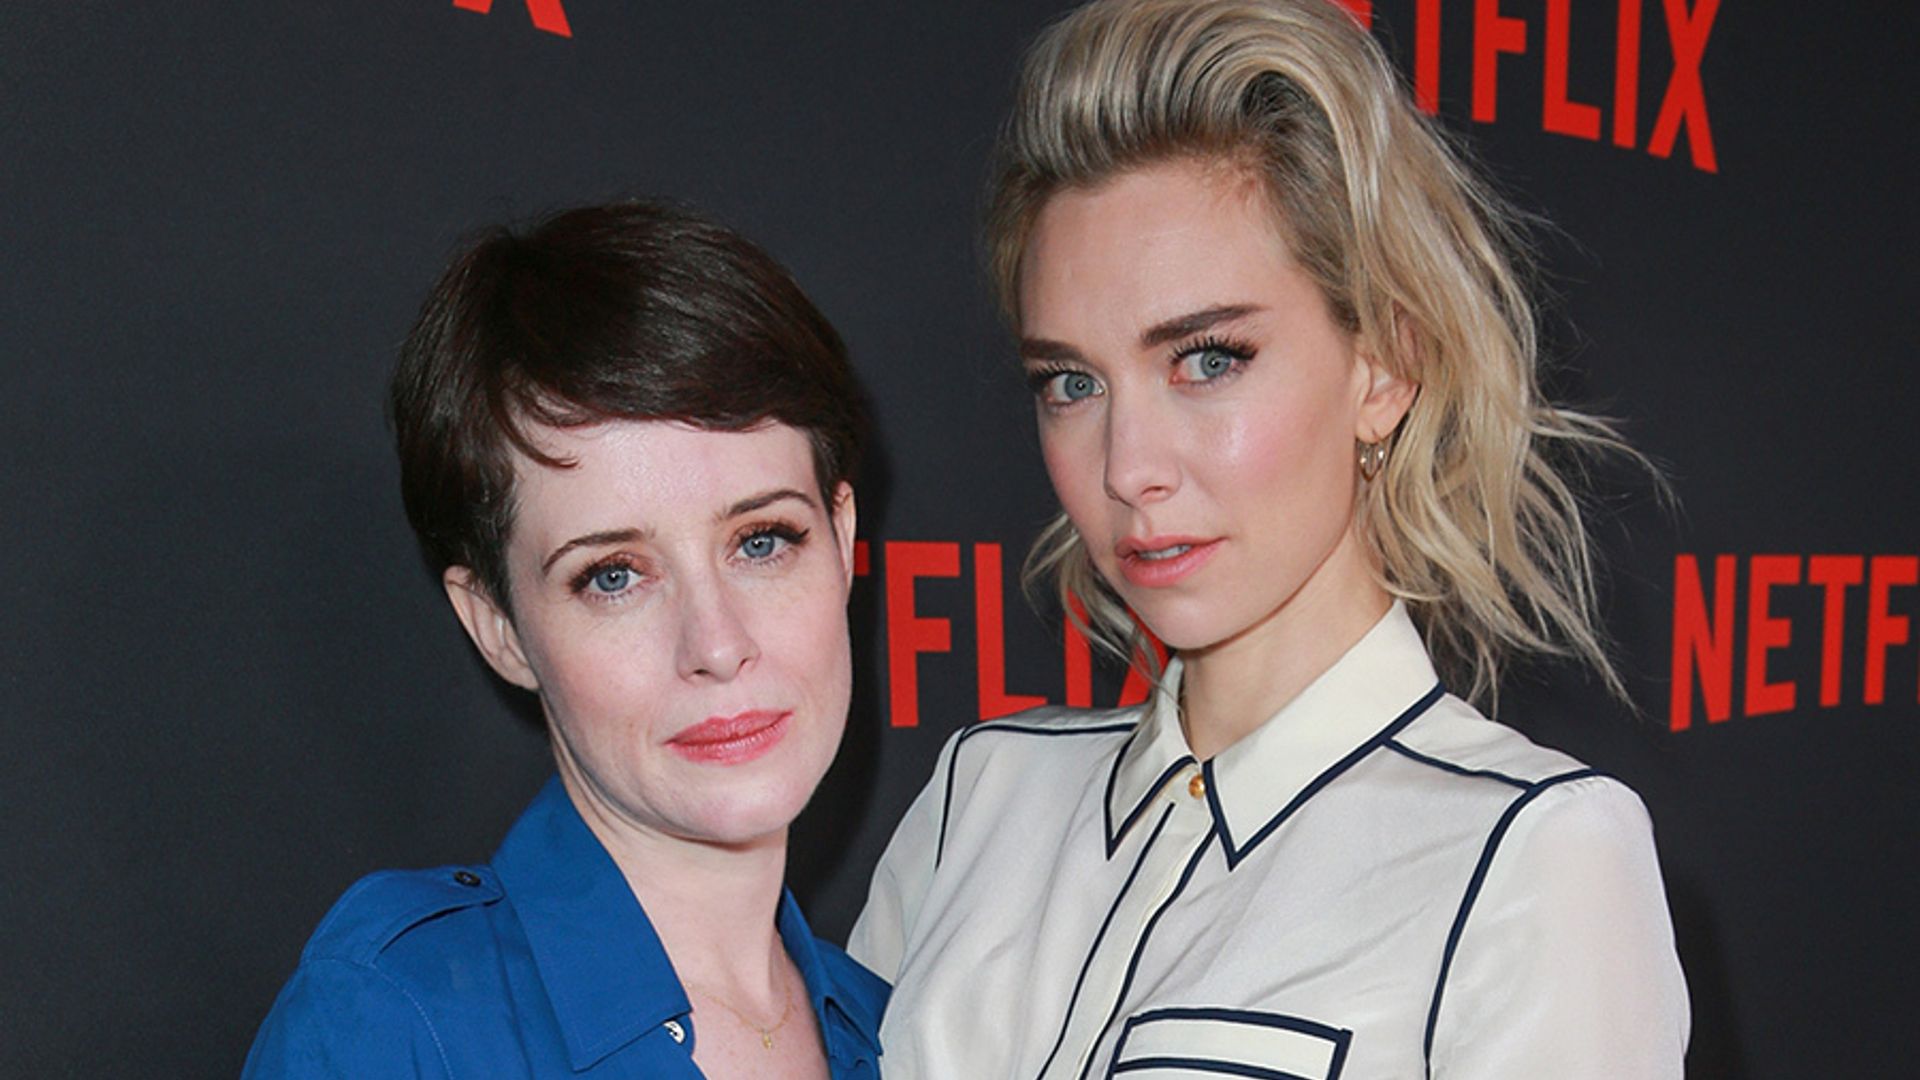 Claire Foy says her 'The Crown' co-star Vanessa Kirby 'sparkles all over'